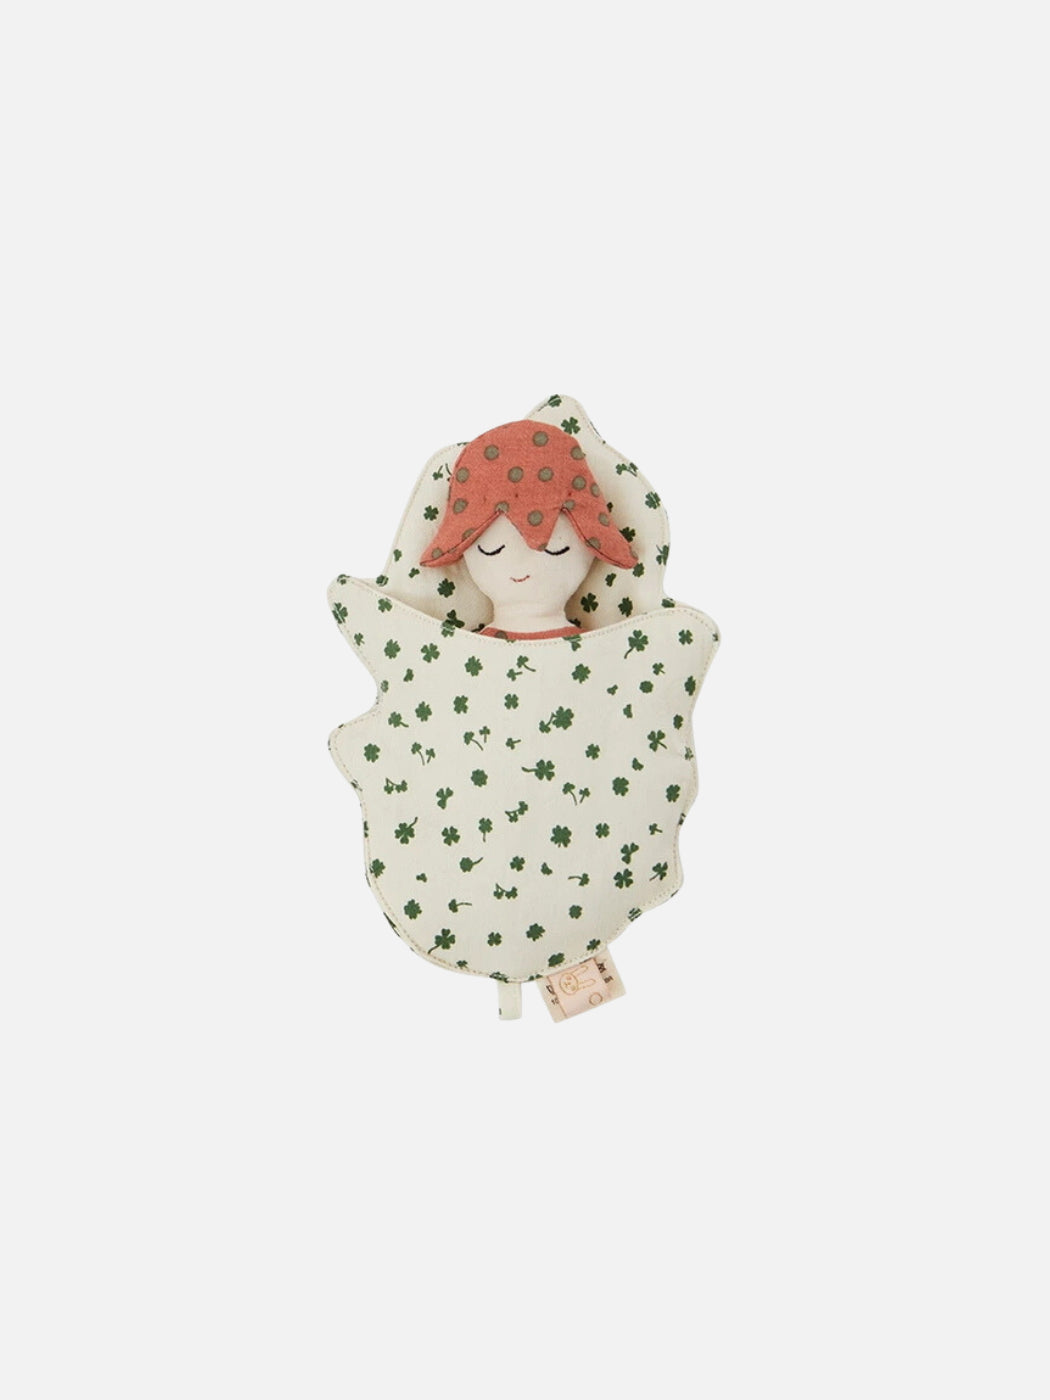 Little elf doll tucked in a leaf bed by oyoy mini